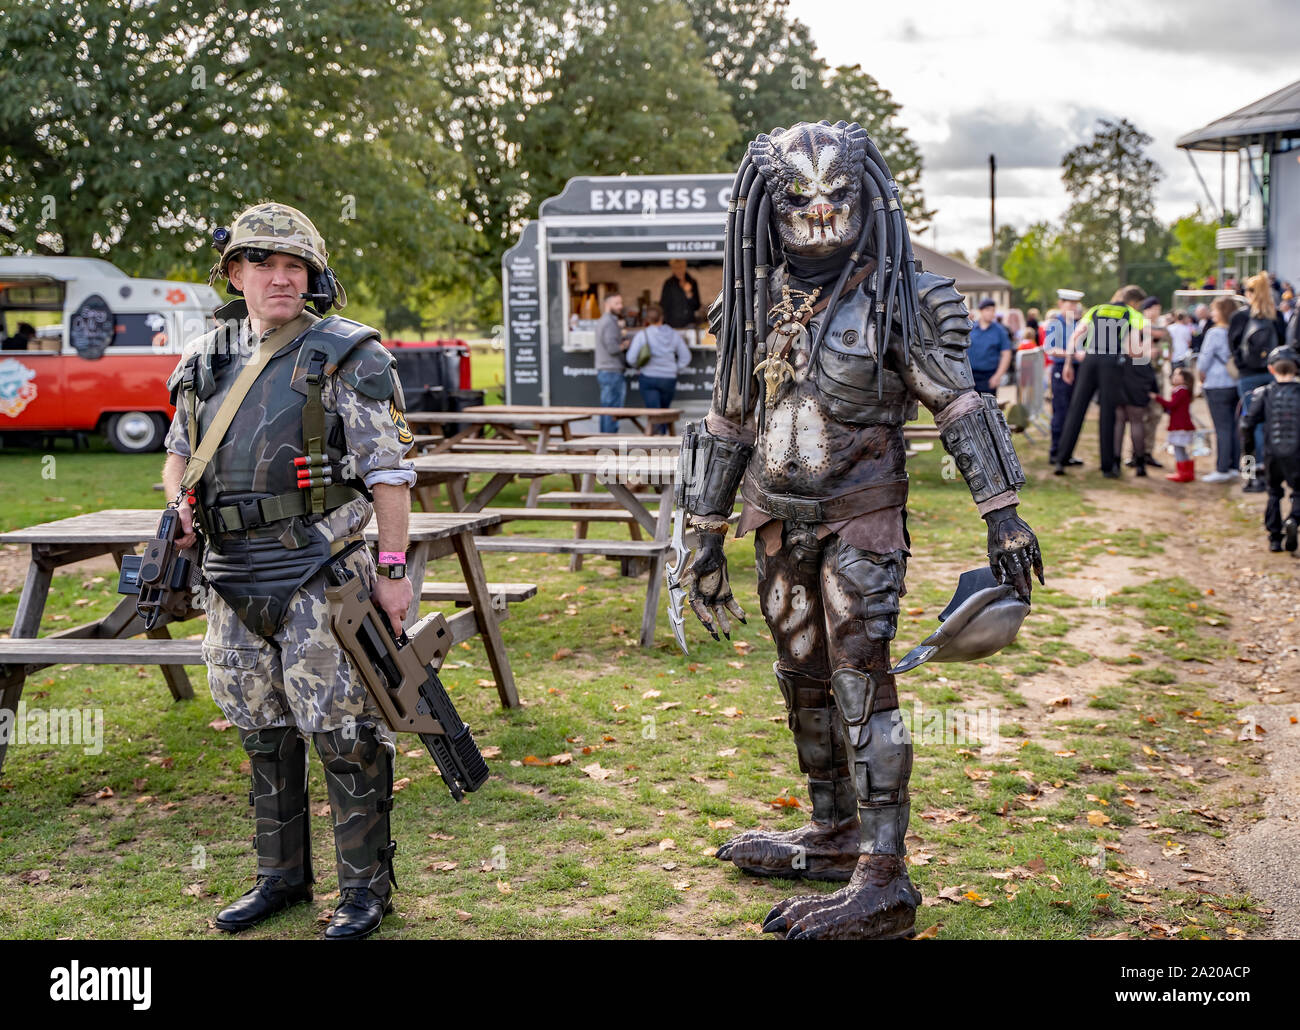 Two men in fancy dress as characters from the Sci-fi movie, Predator, entertaining the crowd queuing for the Nor-Con movie and comic convention Stock Photo